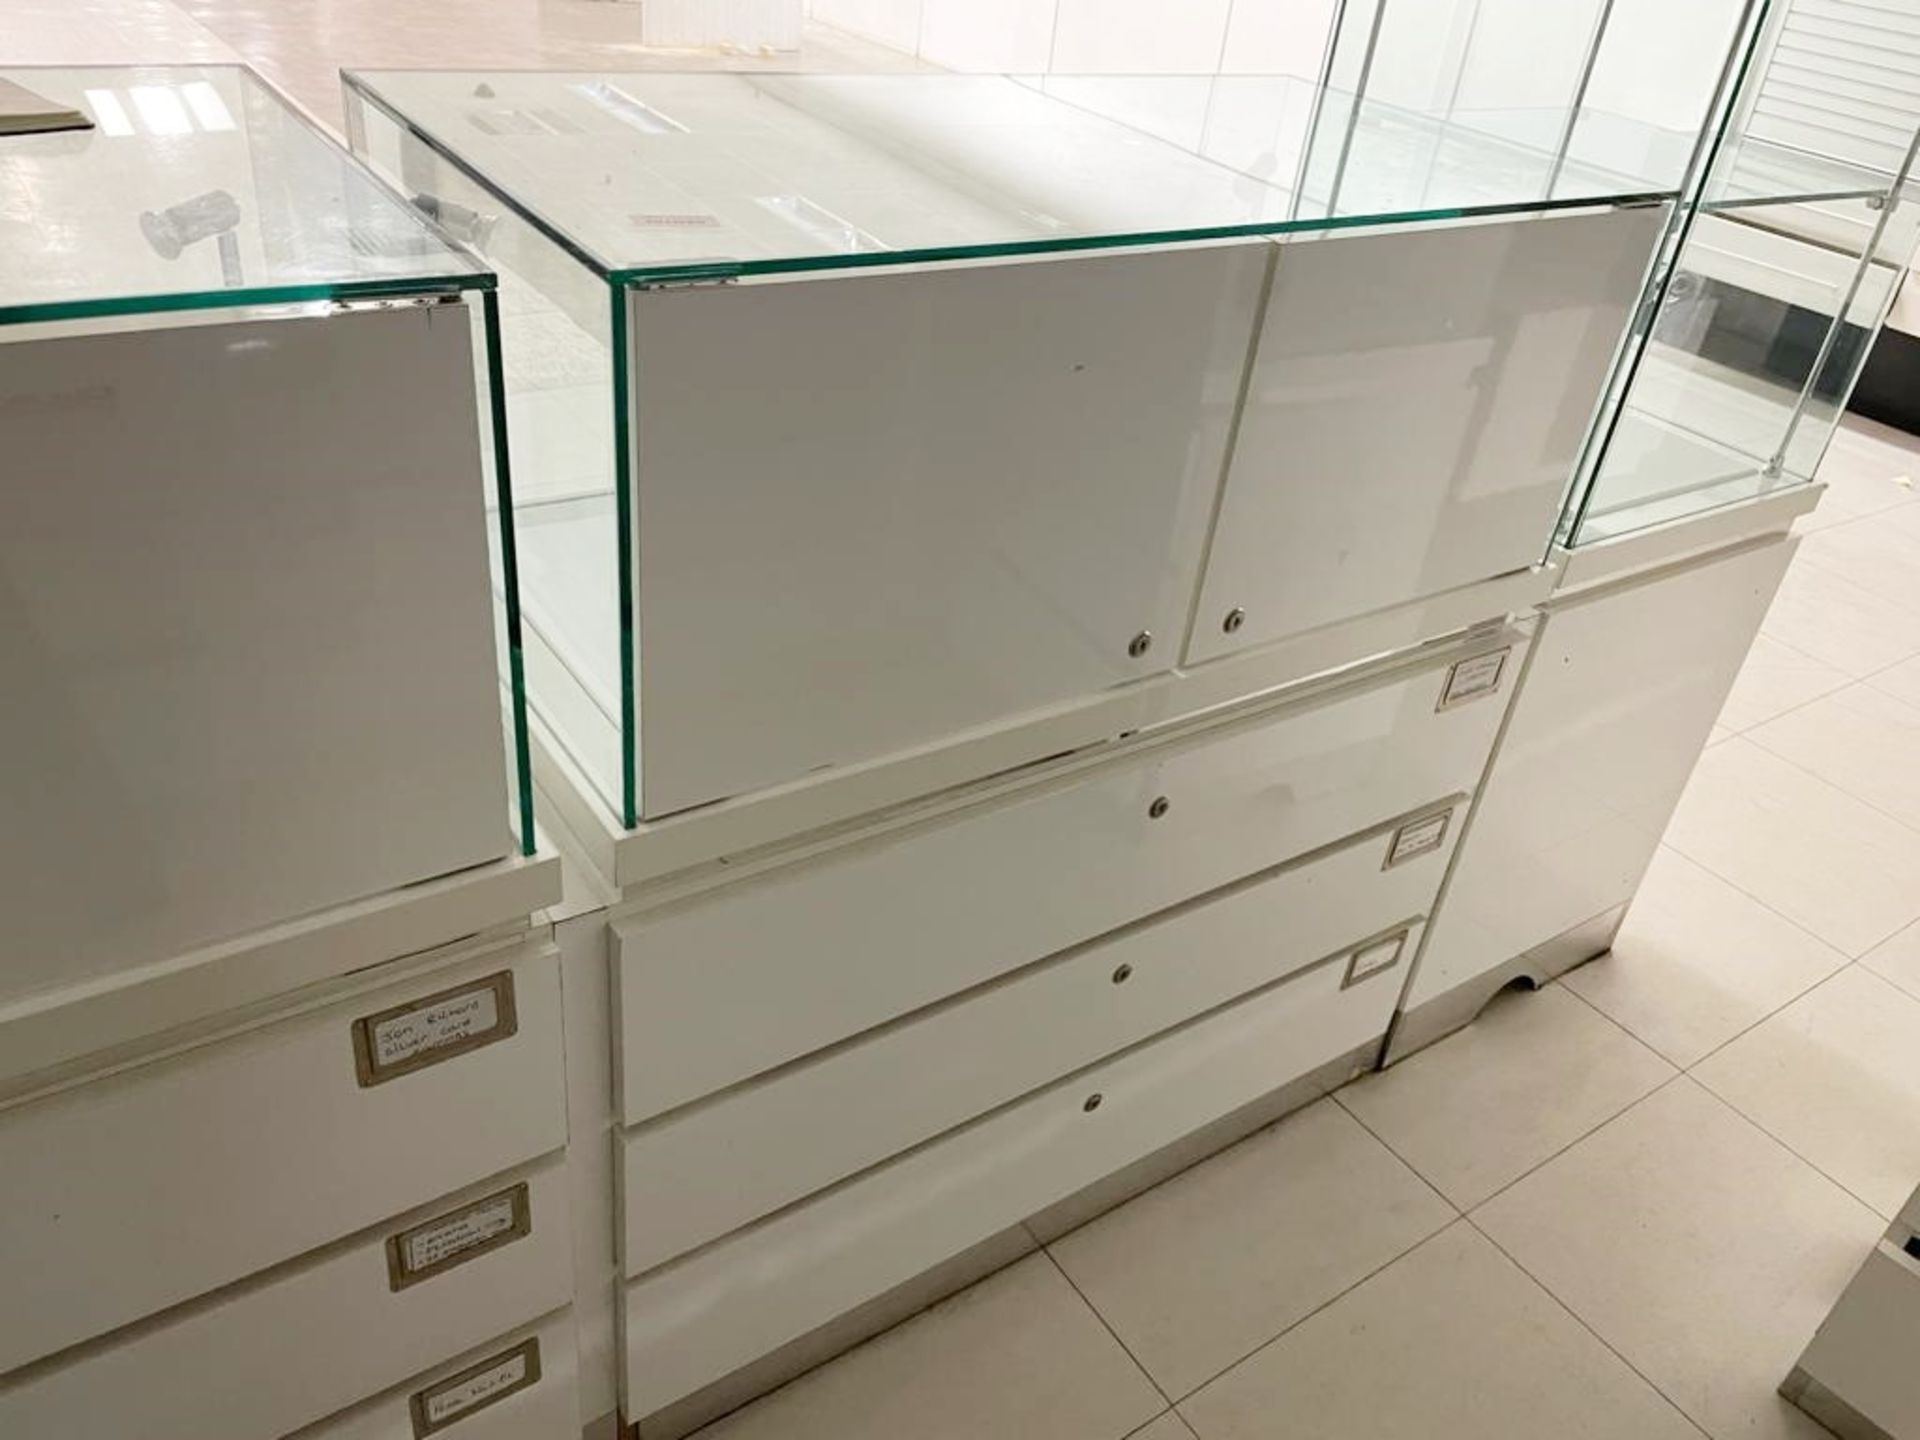 8 x Retail Glass Display Case Counter Cabinets - Features White Gloss Finish, Safety Glass, Internal - Image 6 of 13